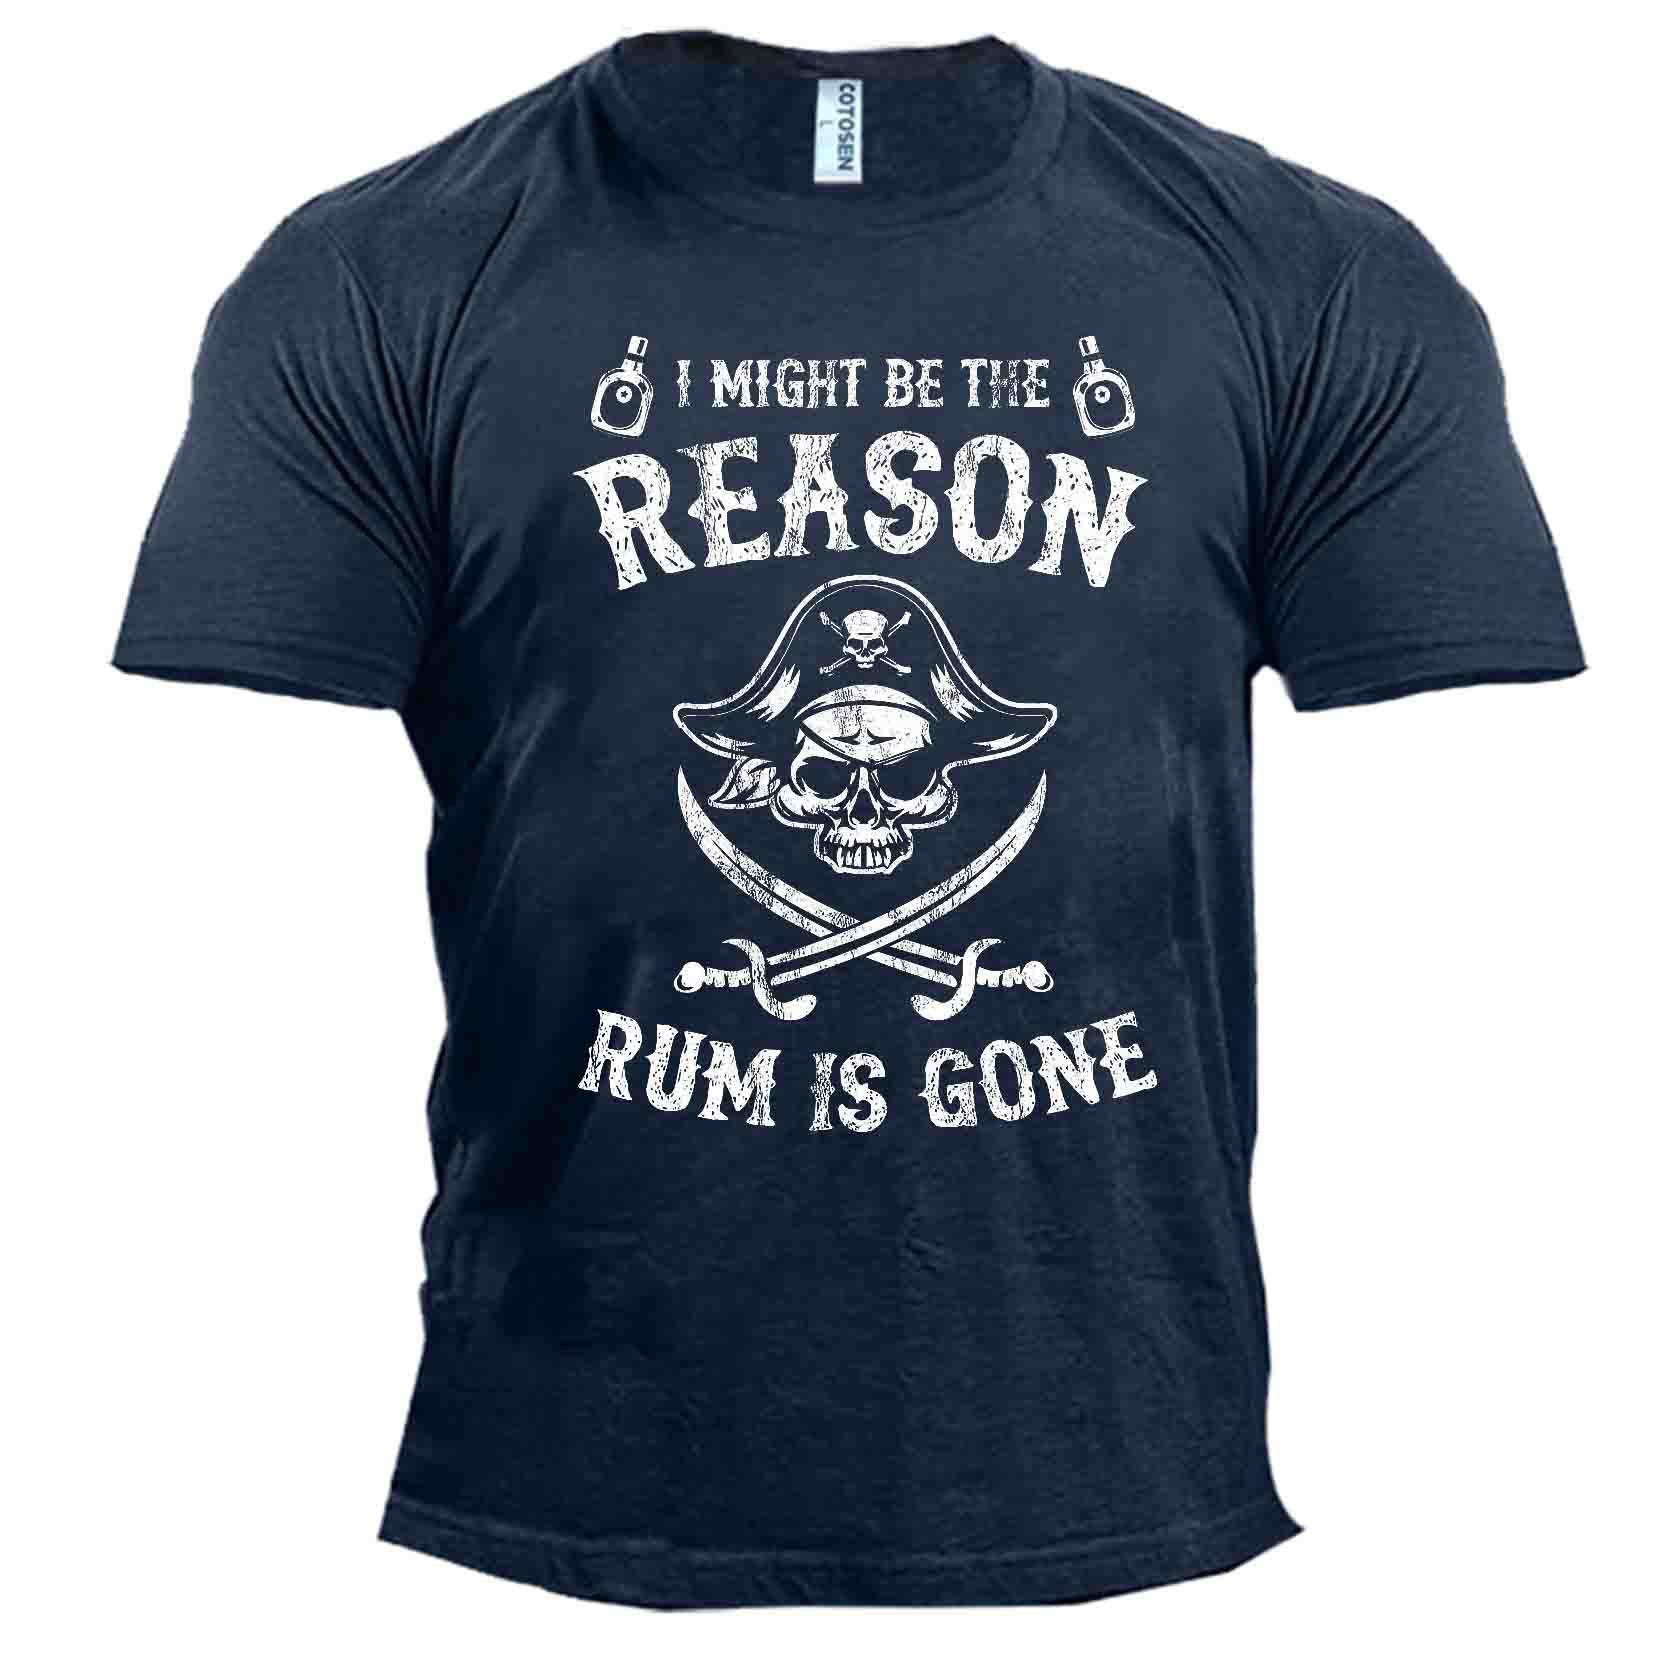 Reason Rum Is Gone Chic Pirate Men's Cotton T-shirt